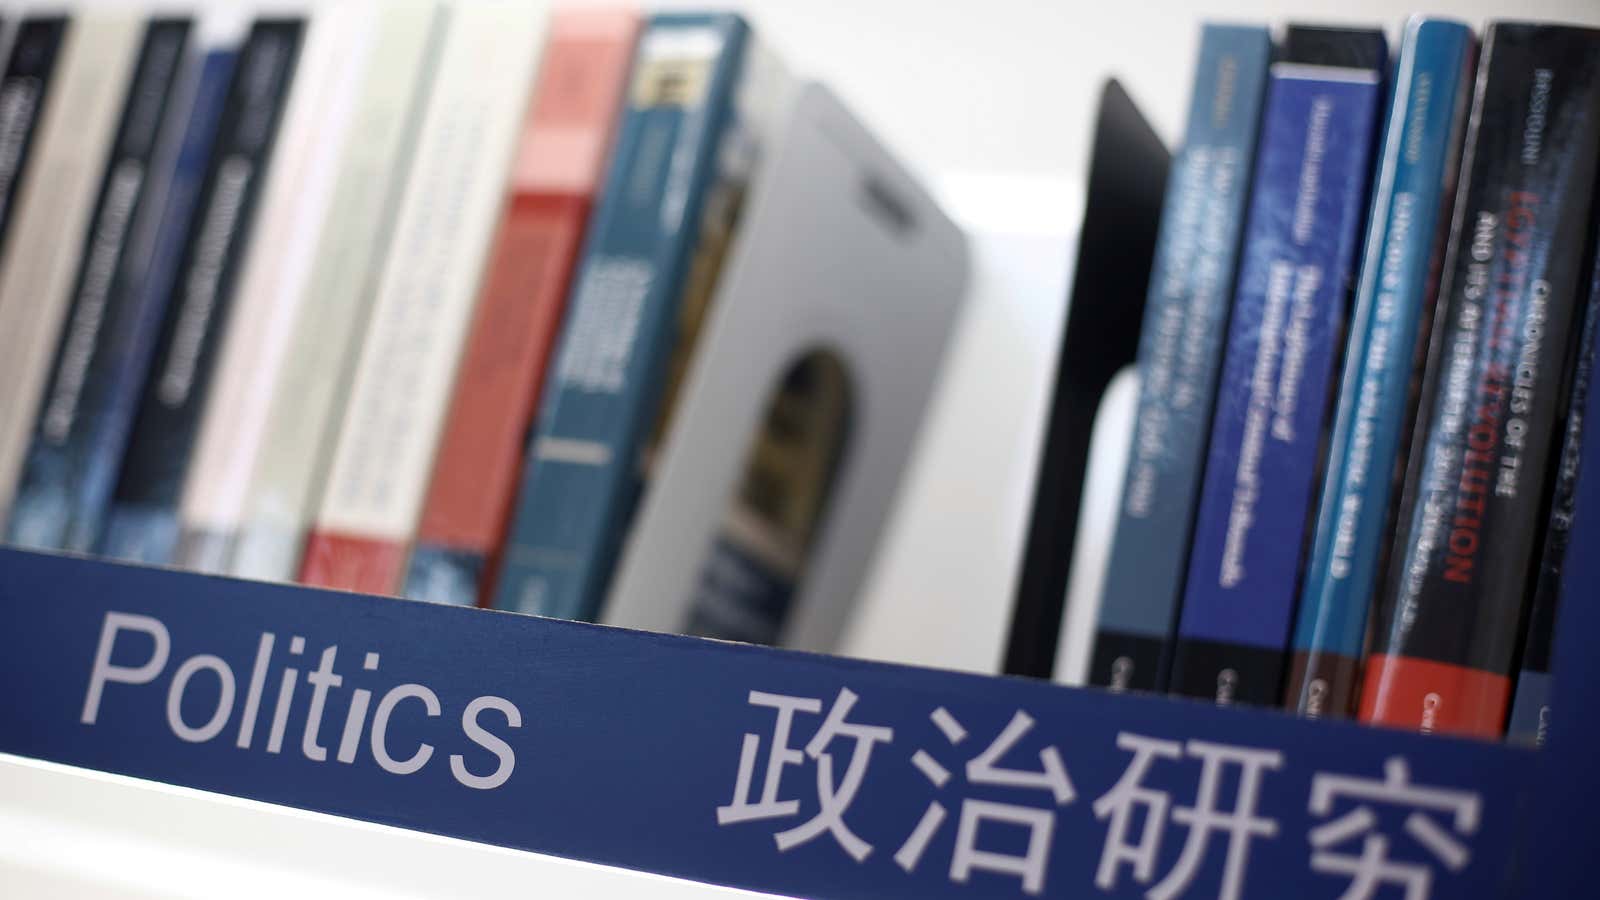 Books on politics are seen on a shelf at the Cambridge University Press (CUP) stall at the Beijing International Book Fair in Beijing, China, August…